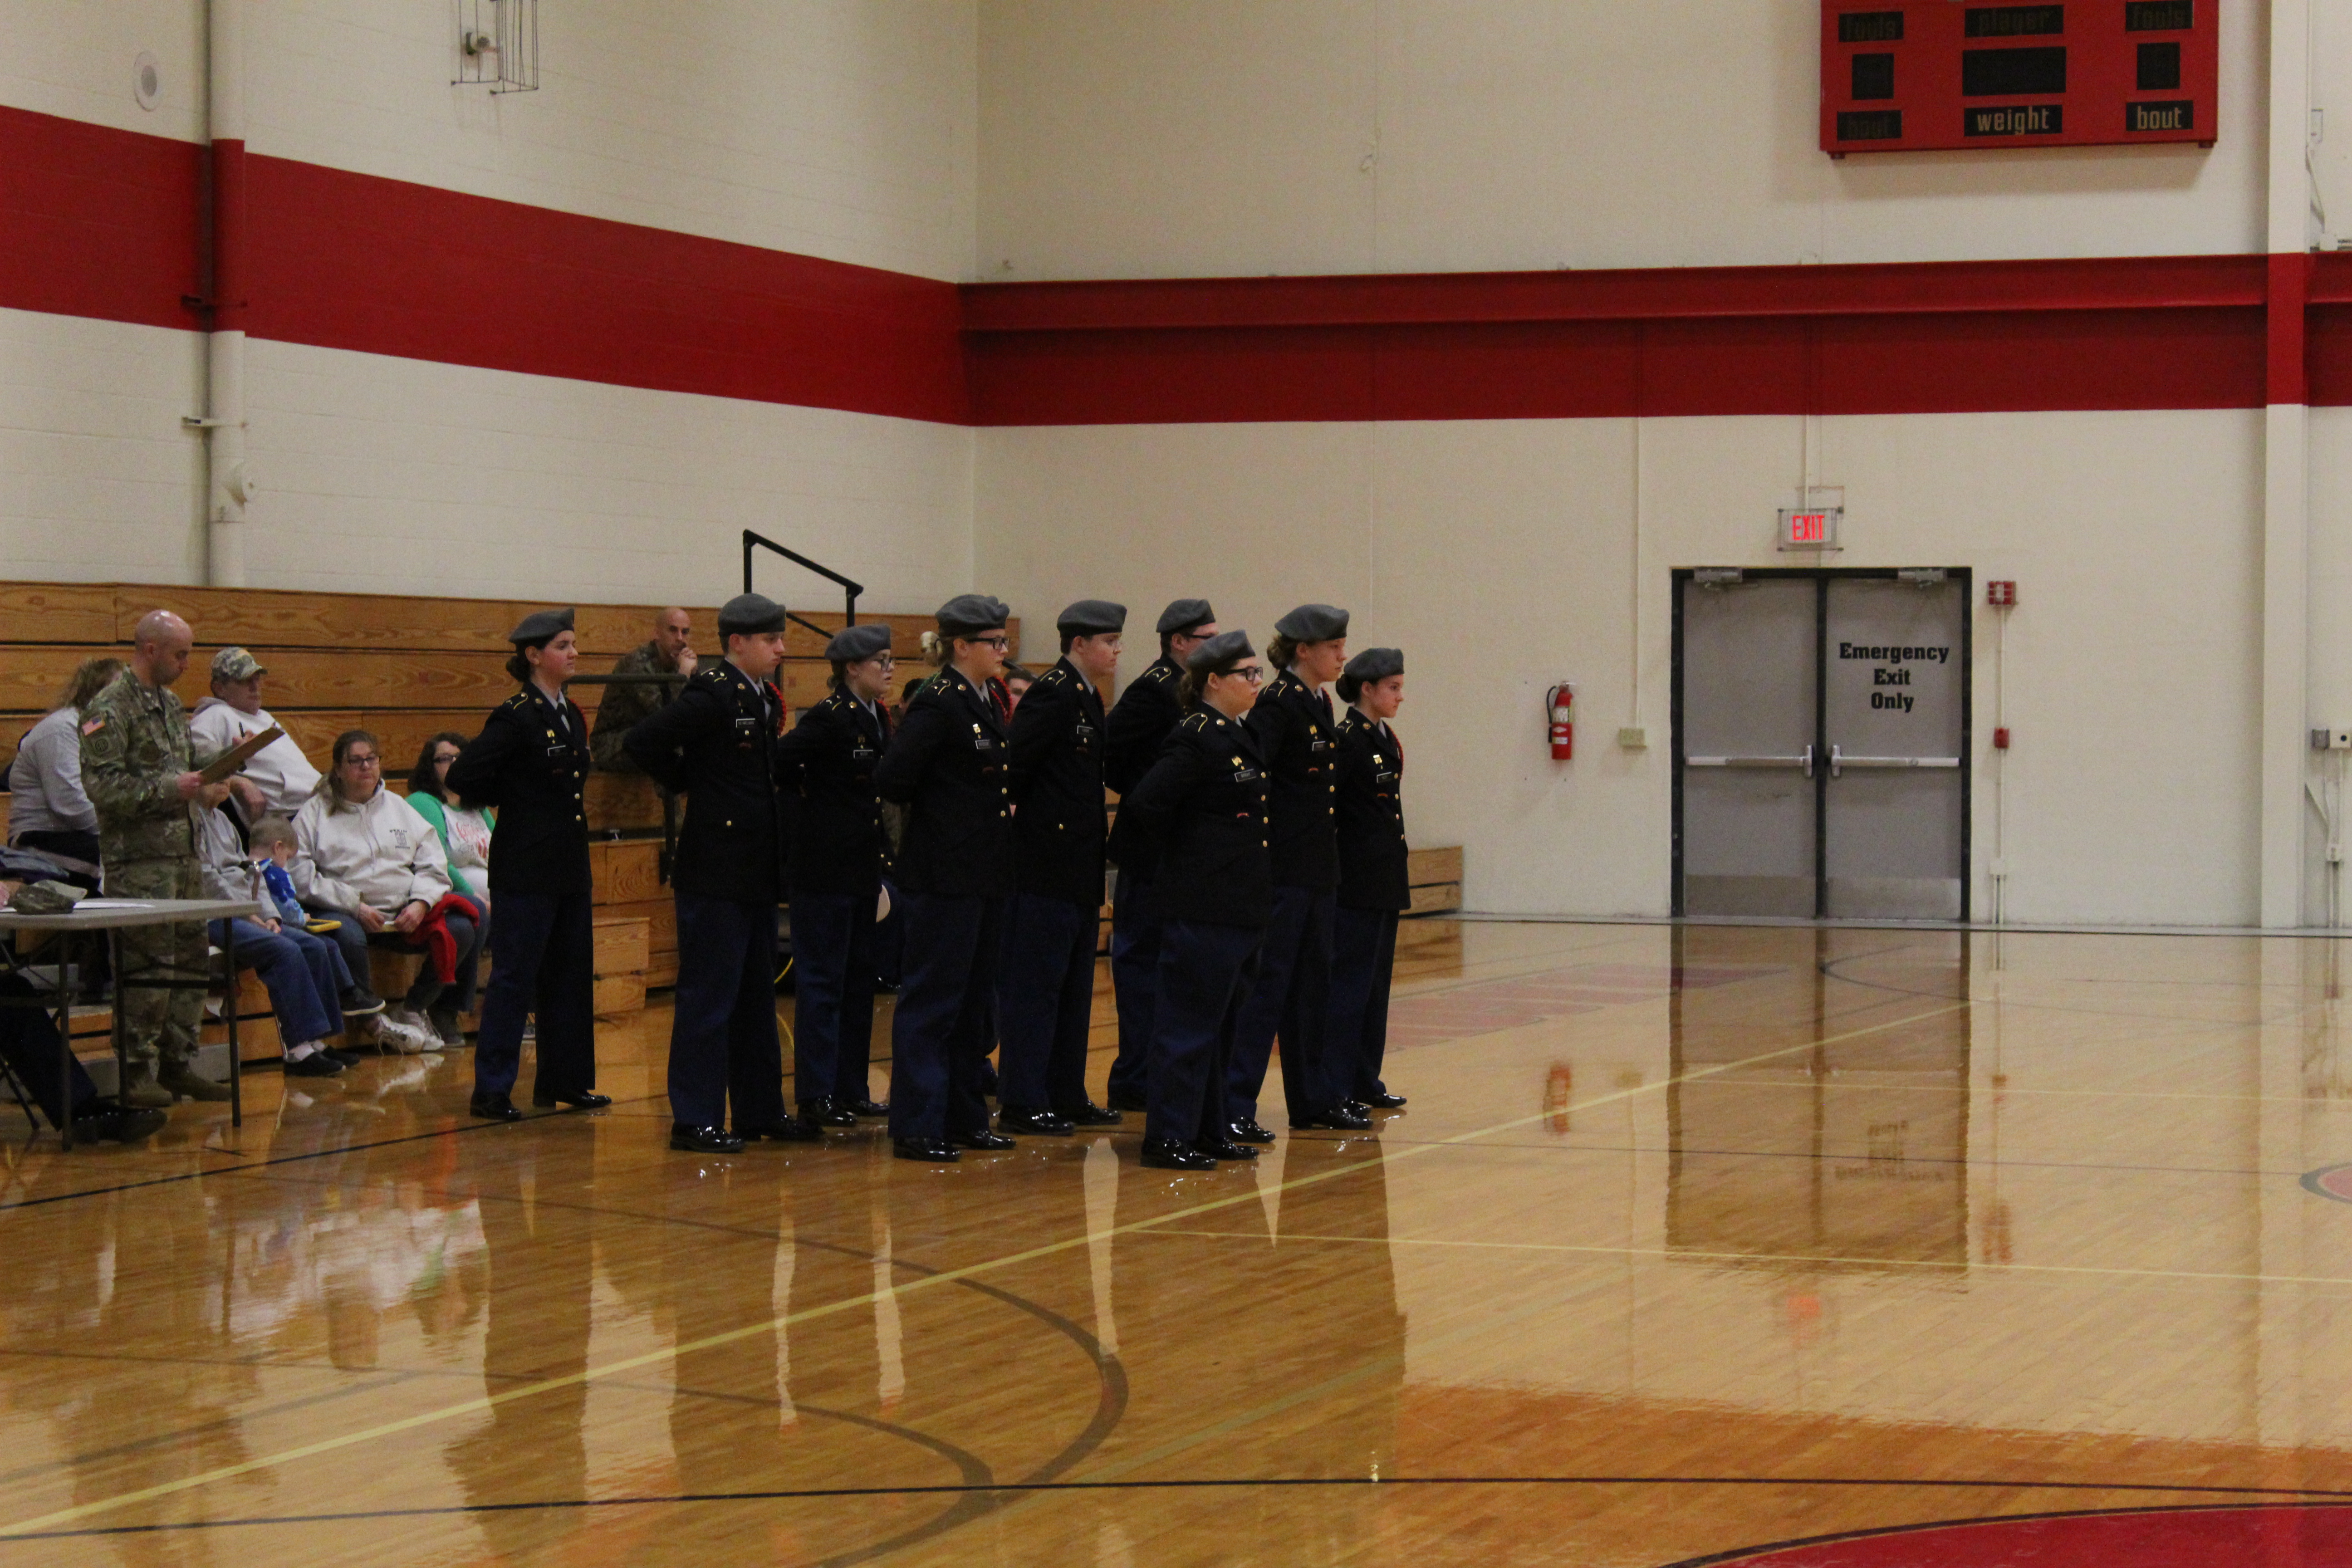 A photo of the drill team in the school gym